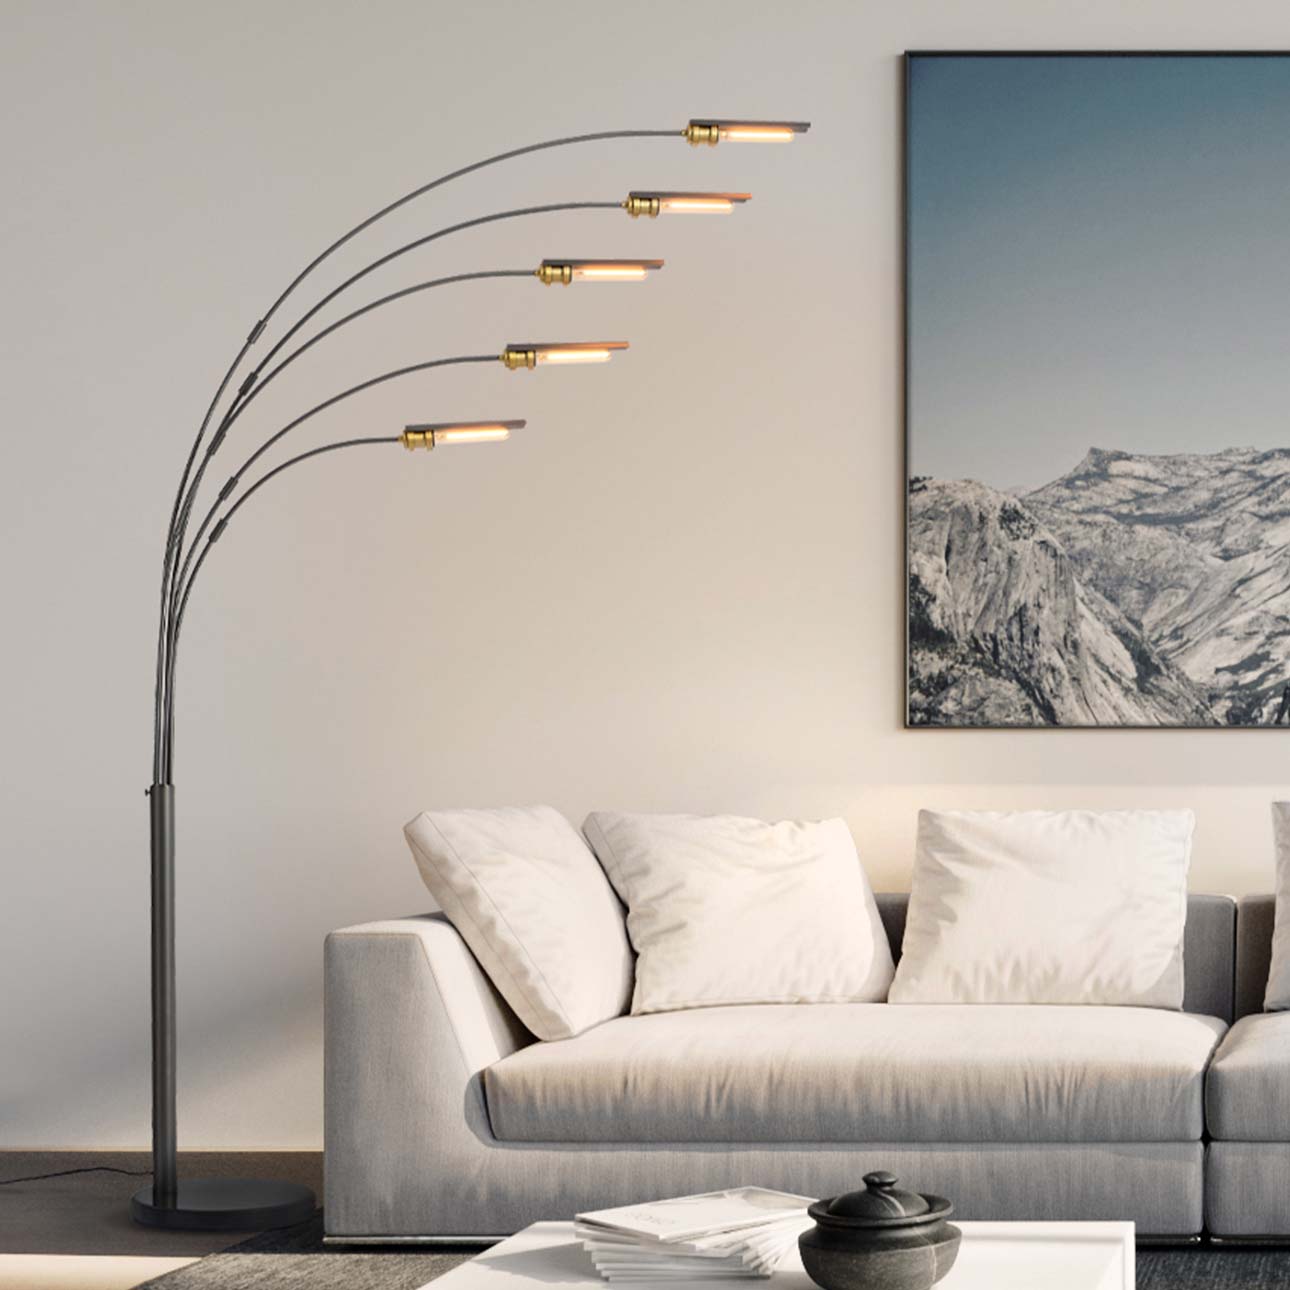 Newport 91″ 5 Light Arc Lamp in Gunmetal and Brushed Brass Accents with Dimmer Switch